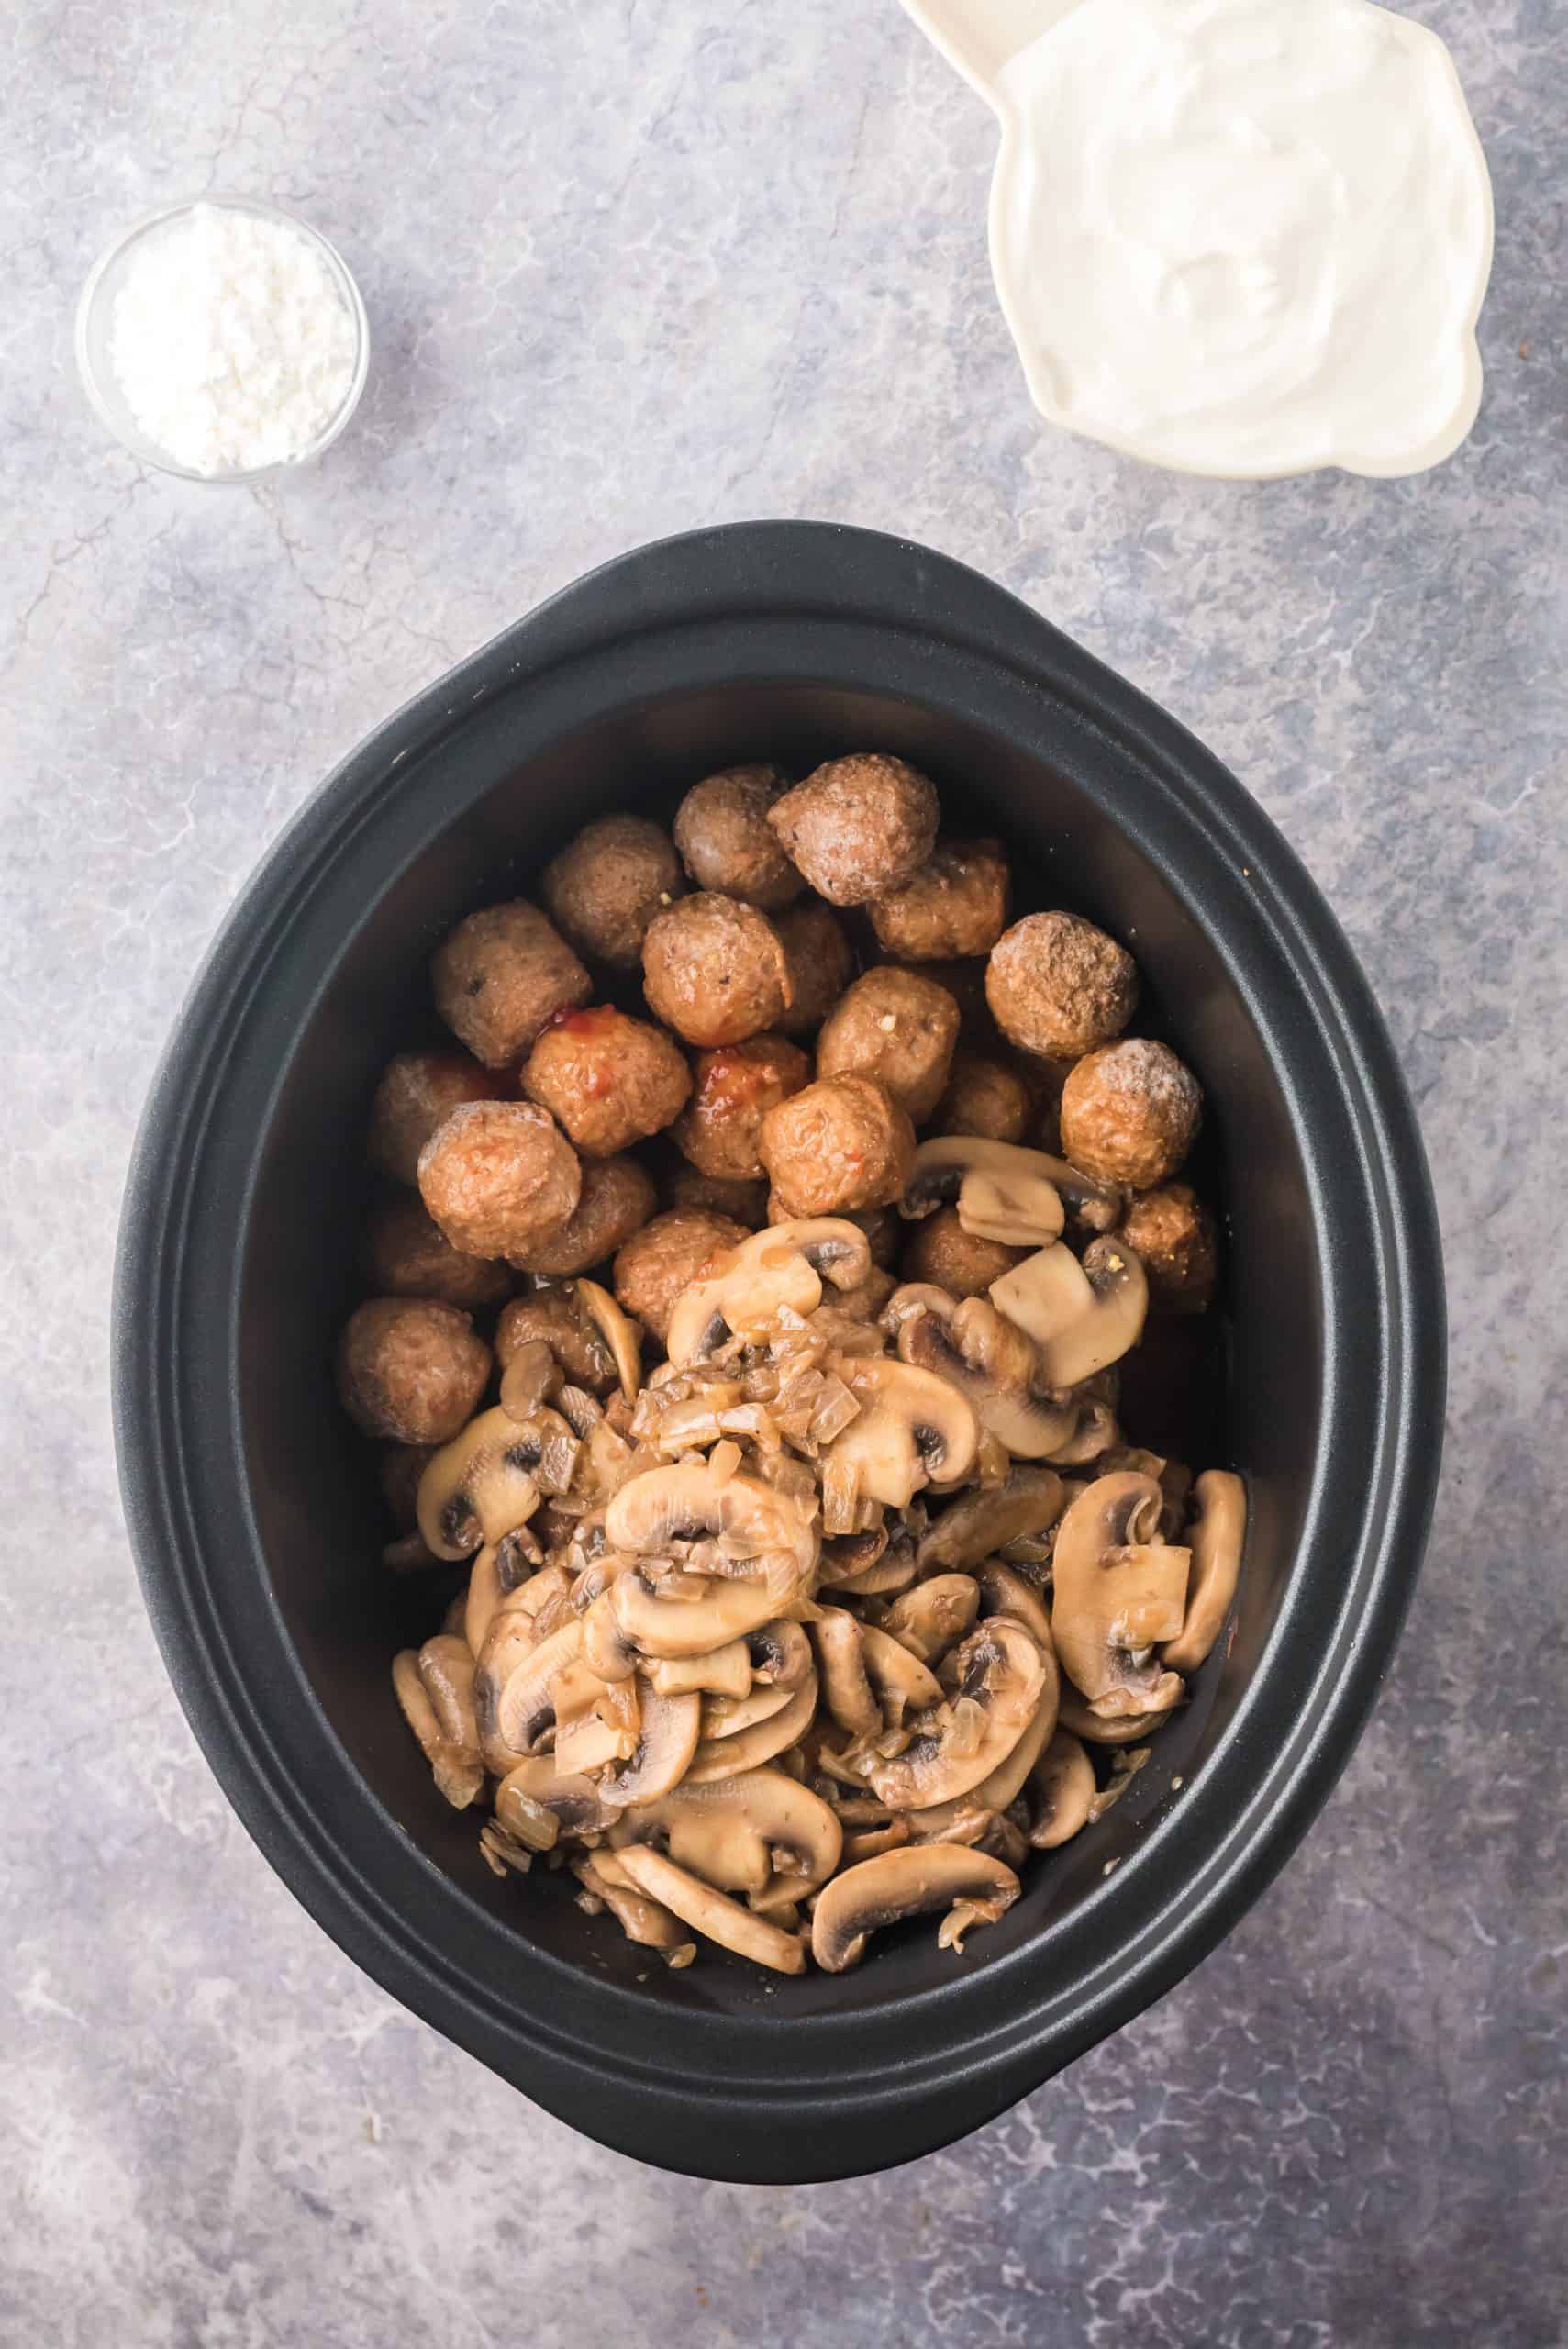 Frozen meatballs and mushroom and onion mixture added to crock pot